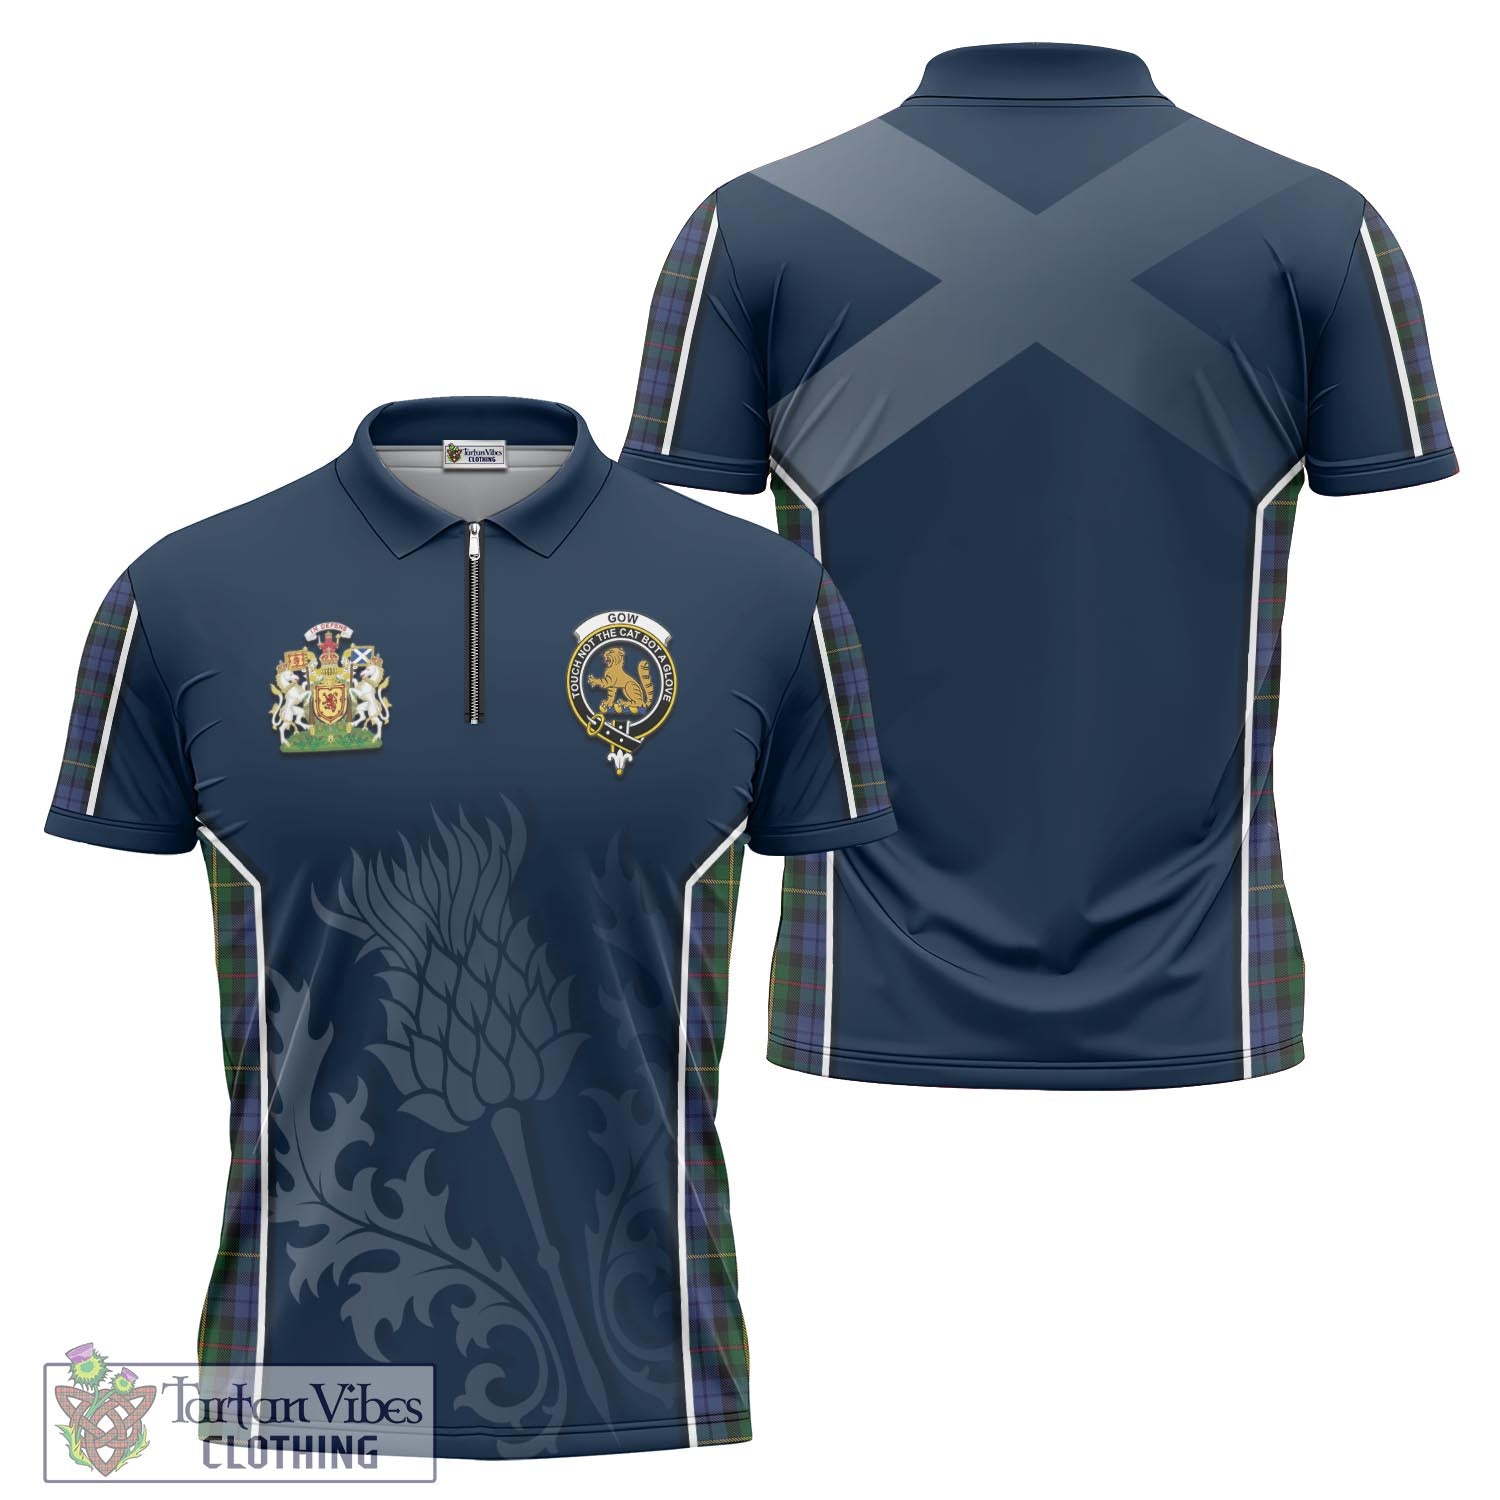 Tartan Vibes Clothing Gow Hunting Tartan Zipper Polo Shirt with Family Crest and Scottish Thistle Vibes Sport Style